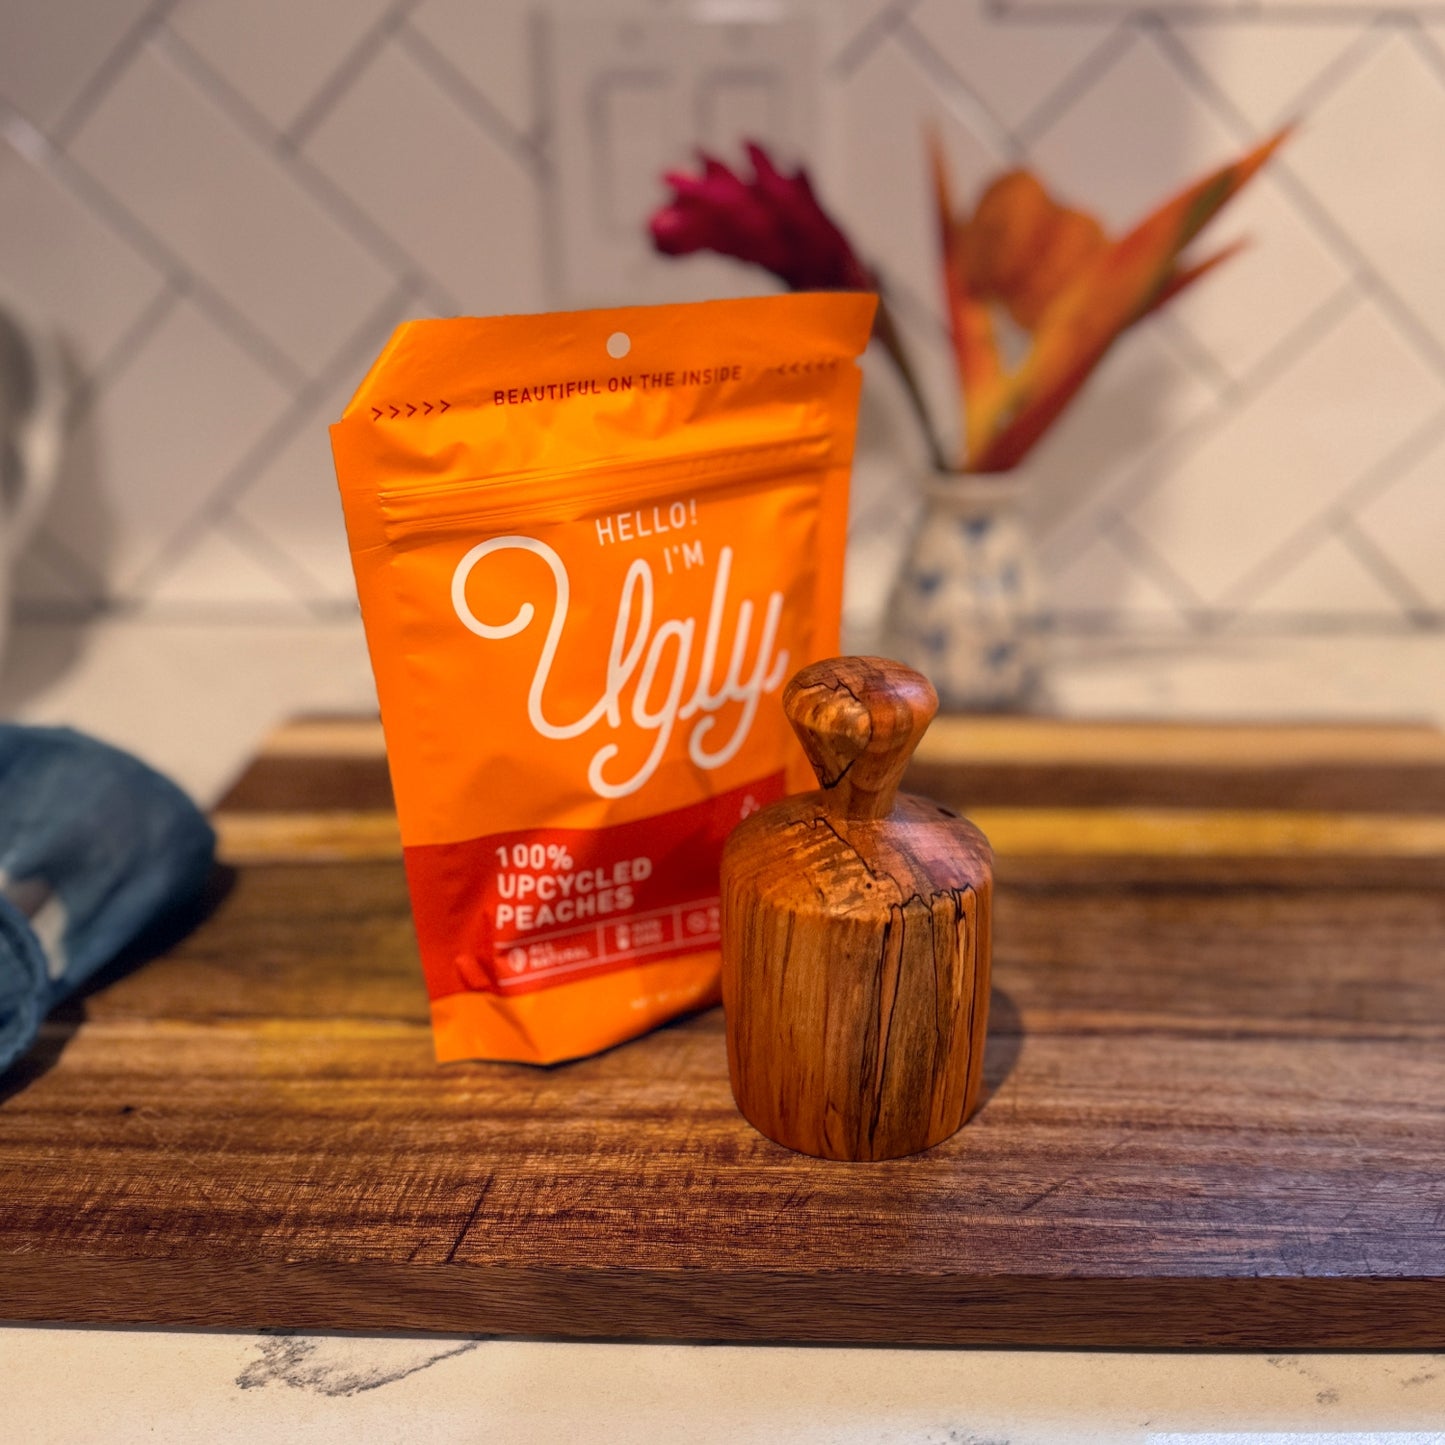 Bag of Upcycled Dried Peaches from the Ugly Company with the biscuit cutter on a wooden board